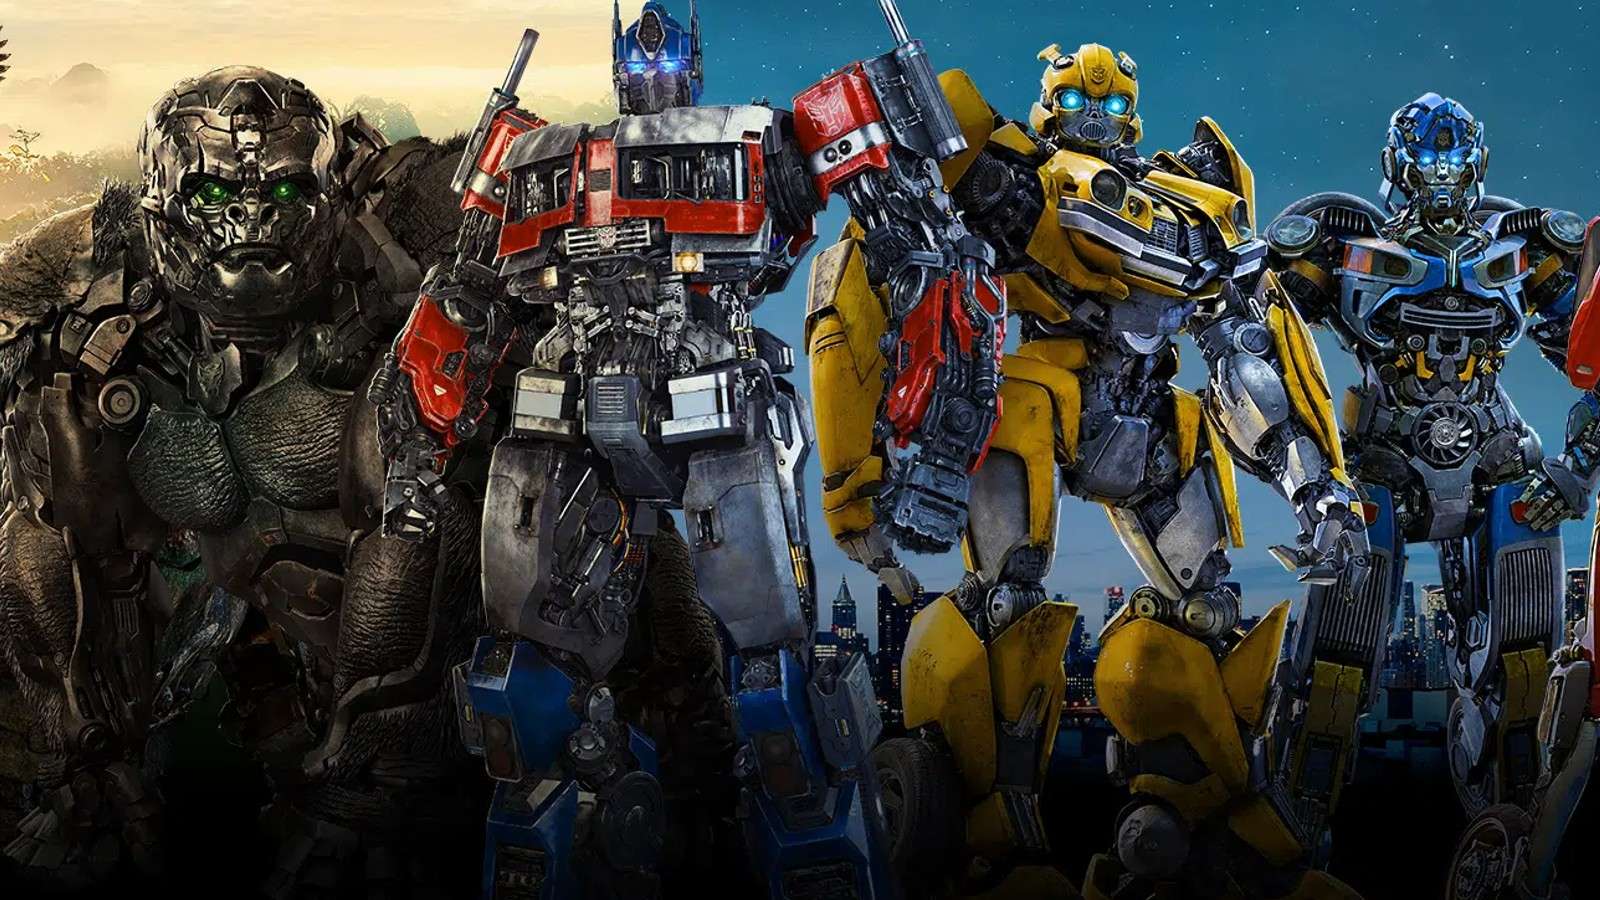 The Maximals and Autobots lined up in Transformers: Rise of the Beasts.